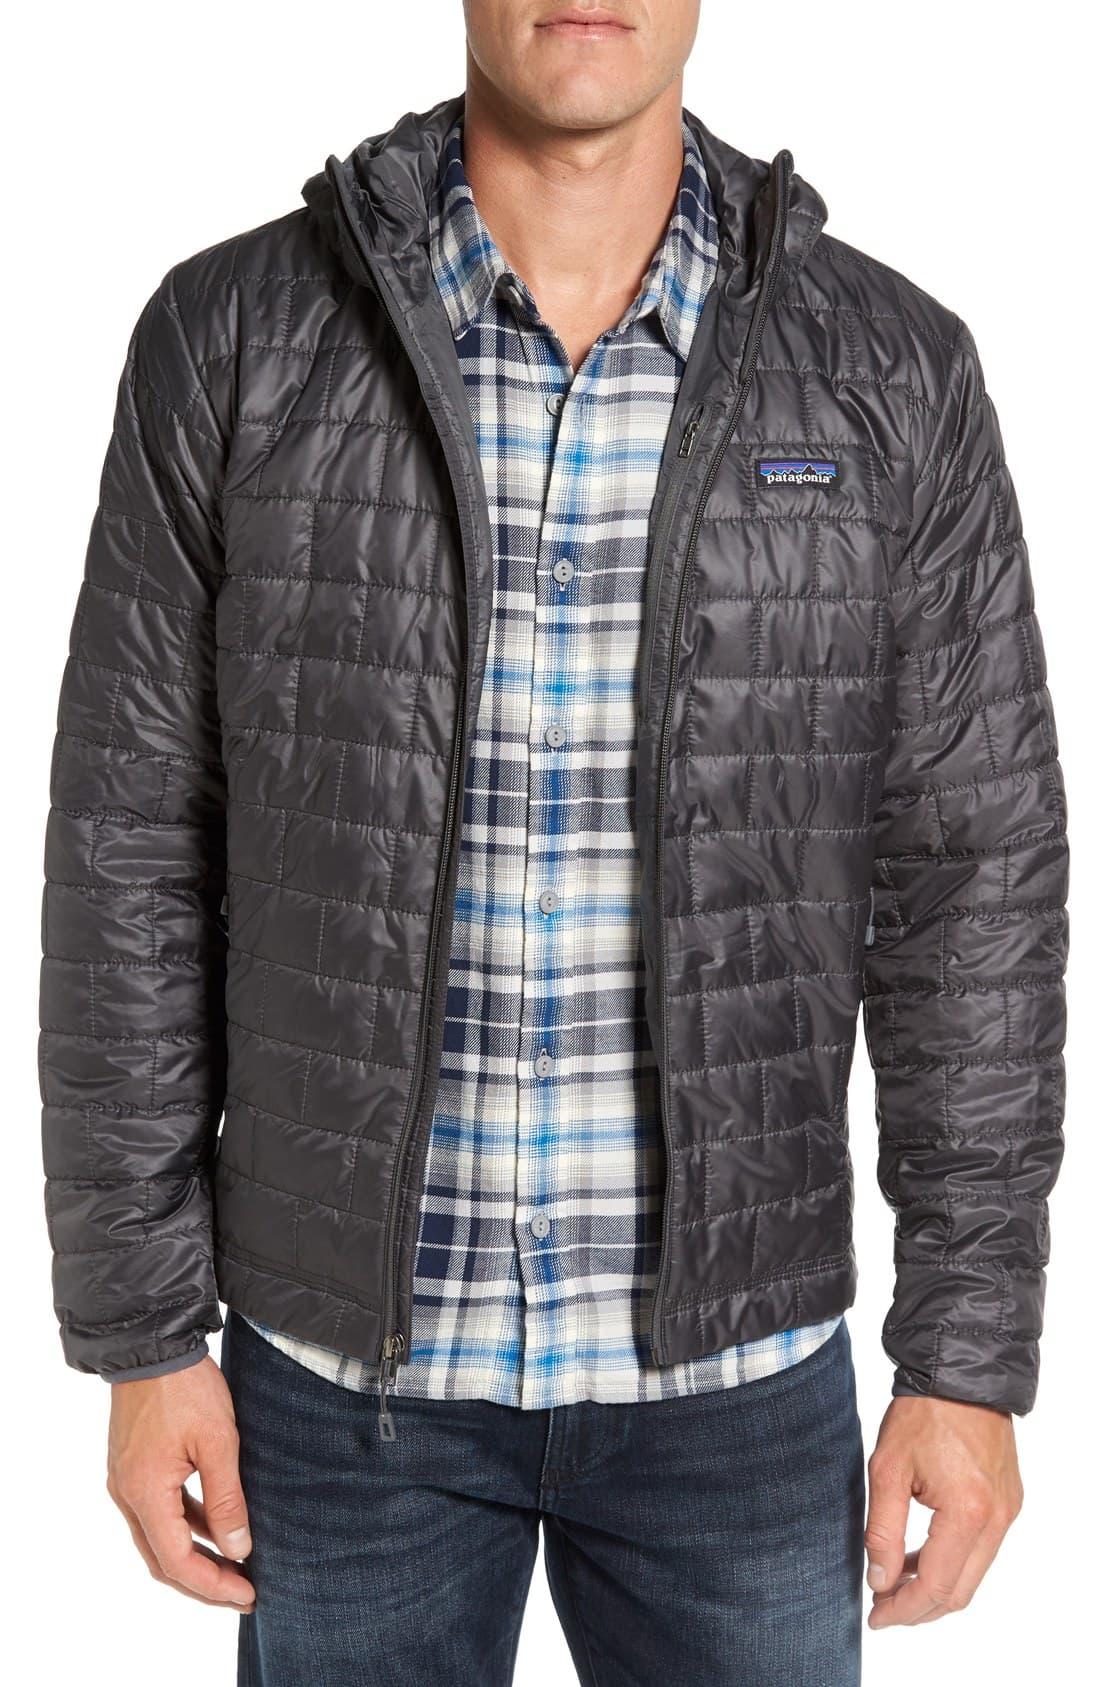 Patagonia Nano Puff Hooded Jacket in Gray for Men - Lyst